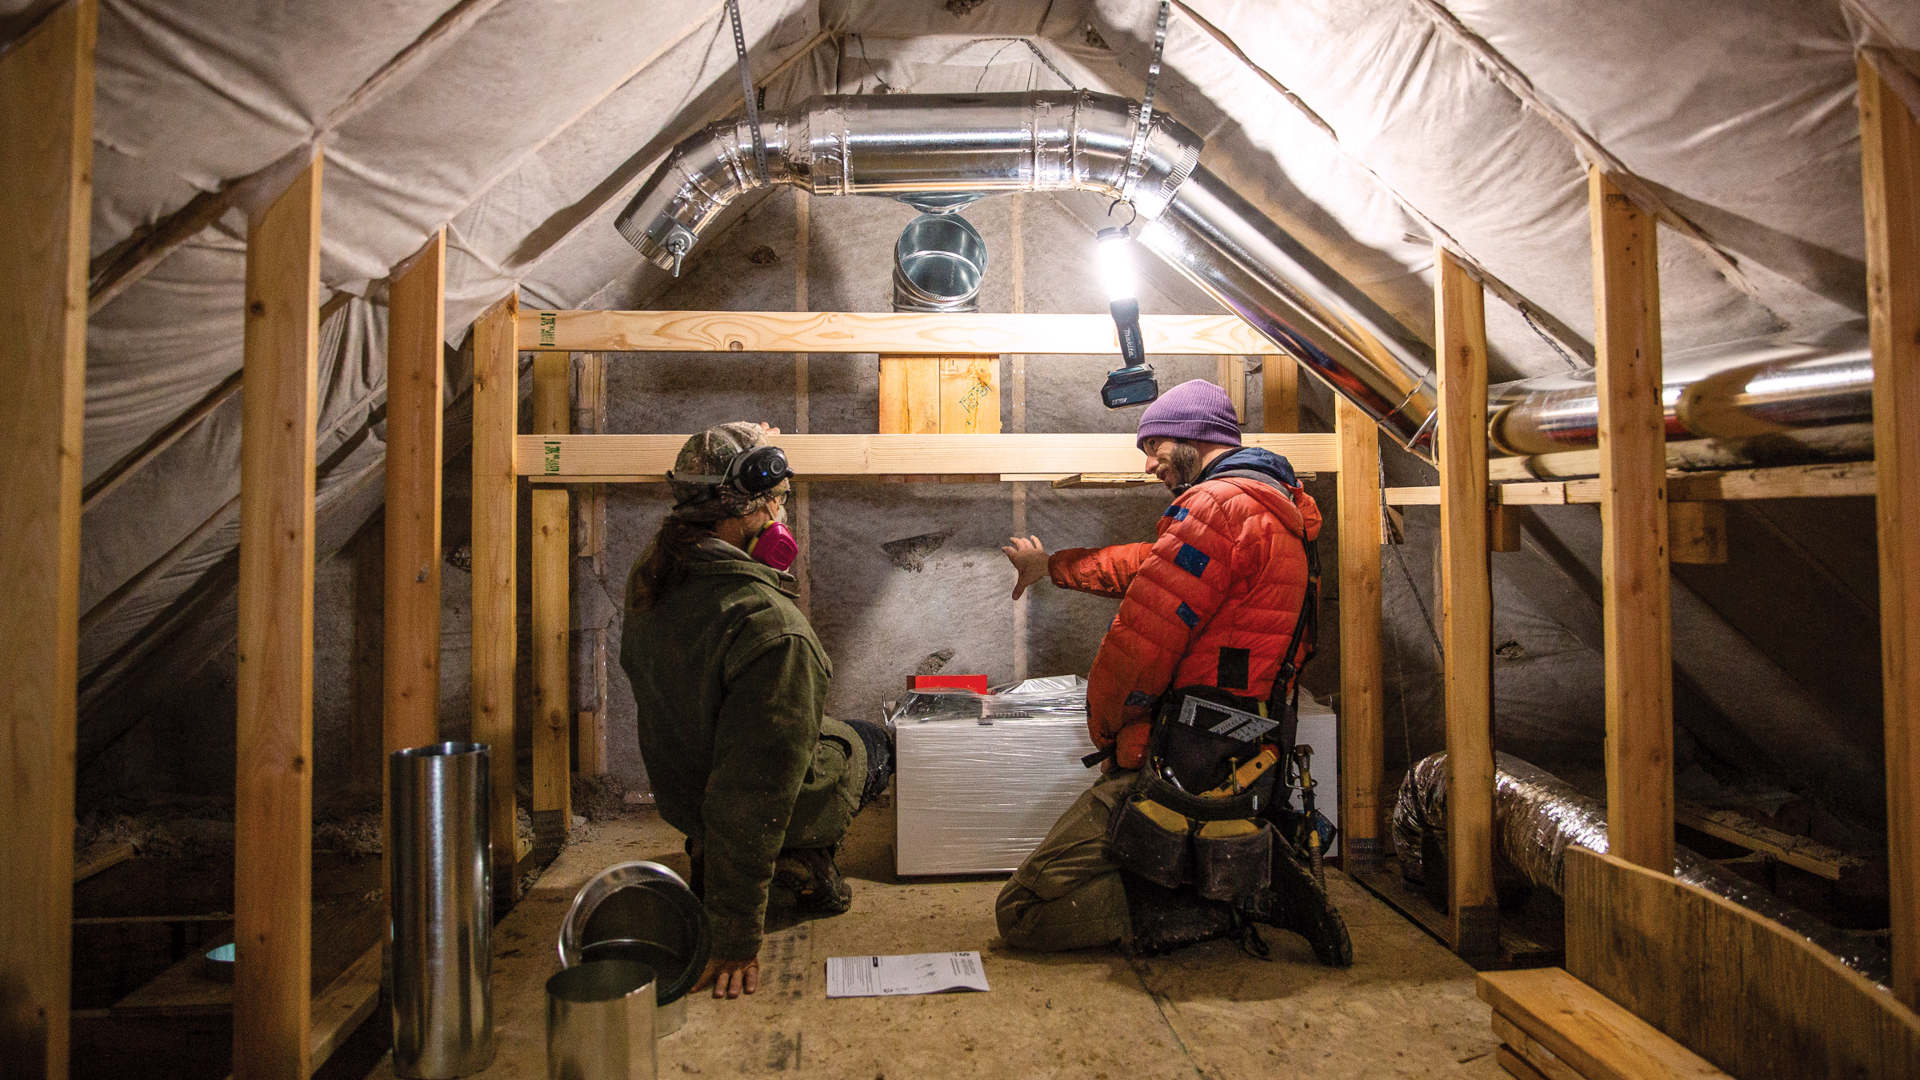 Cillian Liam Barrett and Edward Morrison install a heat pump system in the attic of a new accessory dwelling unit in Crested Butte, Colorado. The town recently passed new energy-efficient building codes.